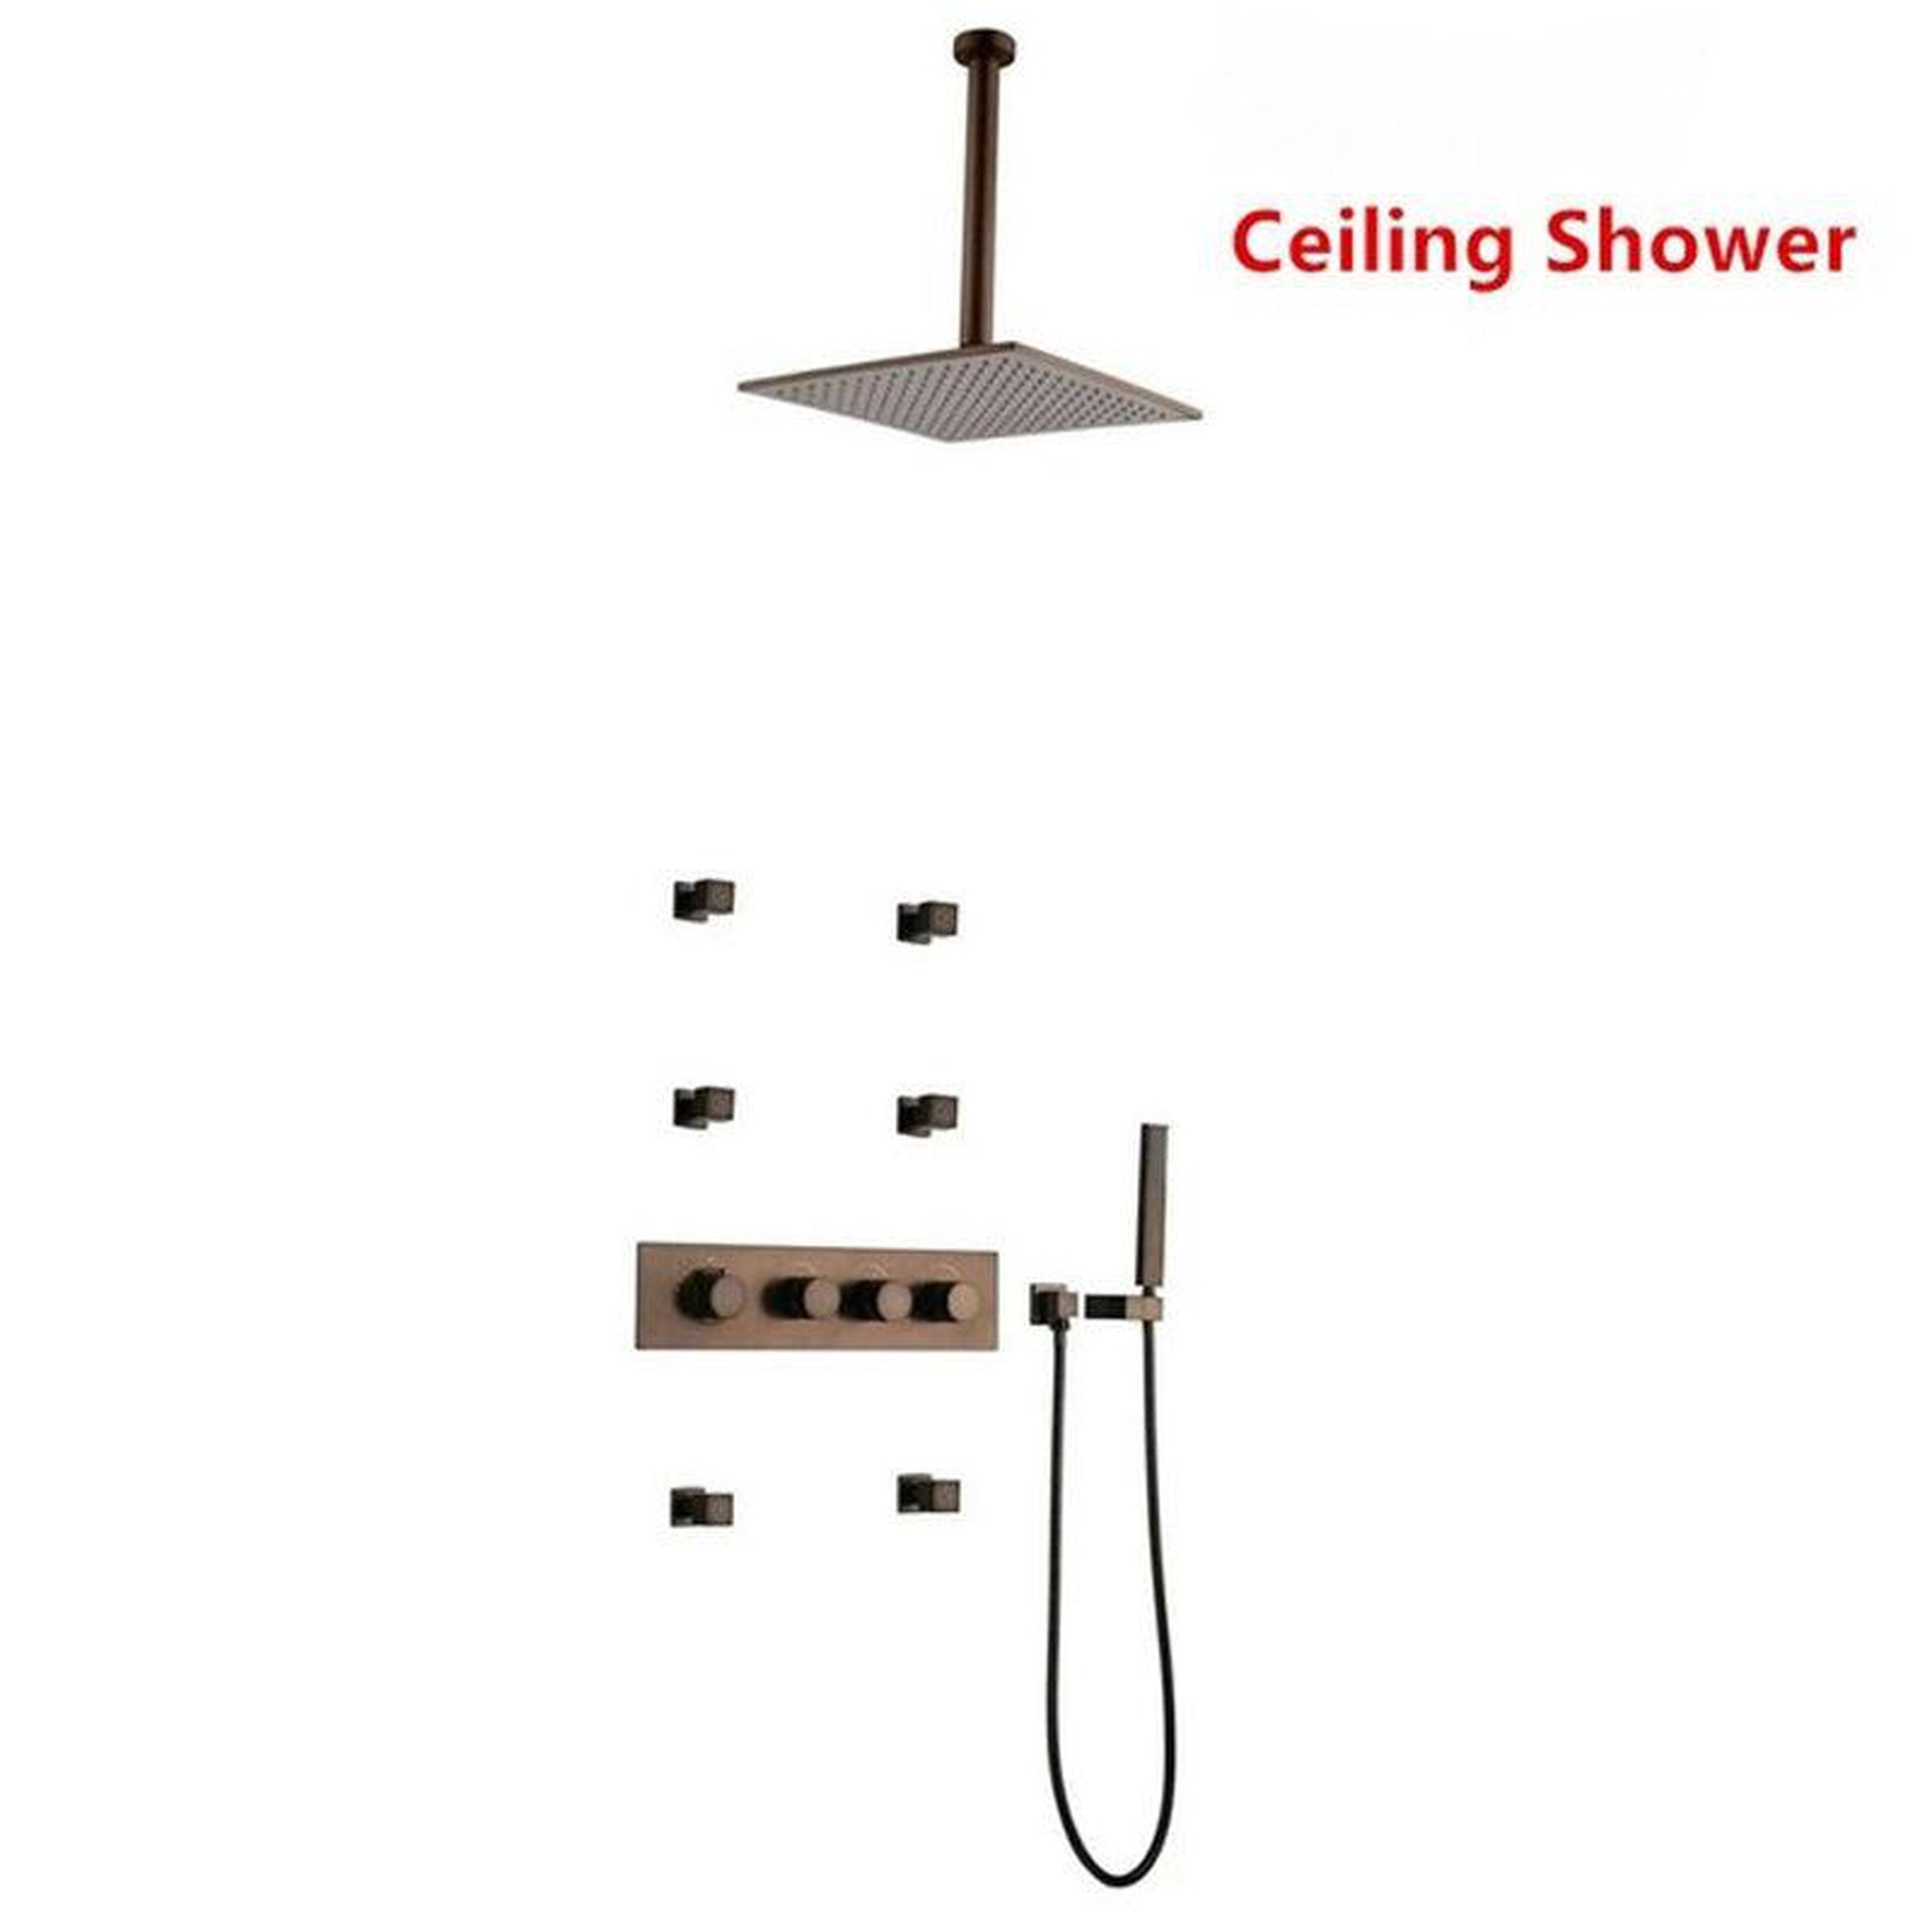 Fontana Lyon Oil Rubbed Bronze Ceiling Mounted Luxurious Rainfall Bathroom Shower System With 6-Body Jets and Hand Shower